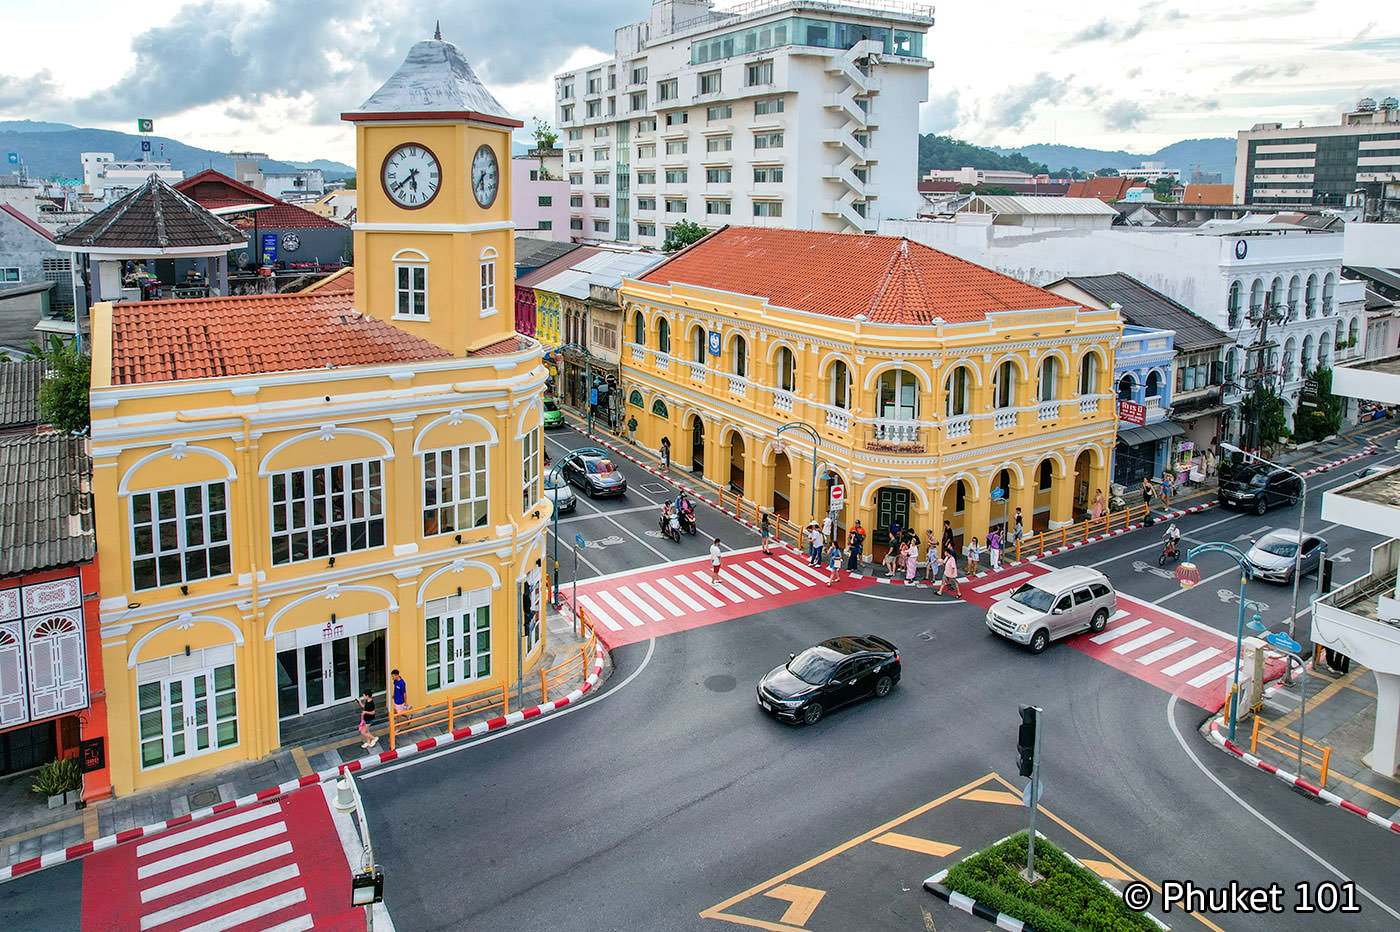 Old Phuket Town bank seen from above